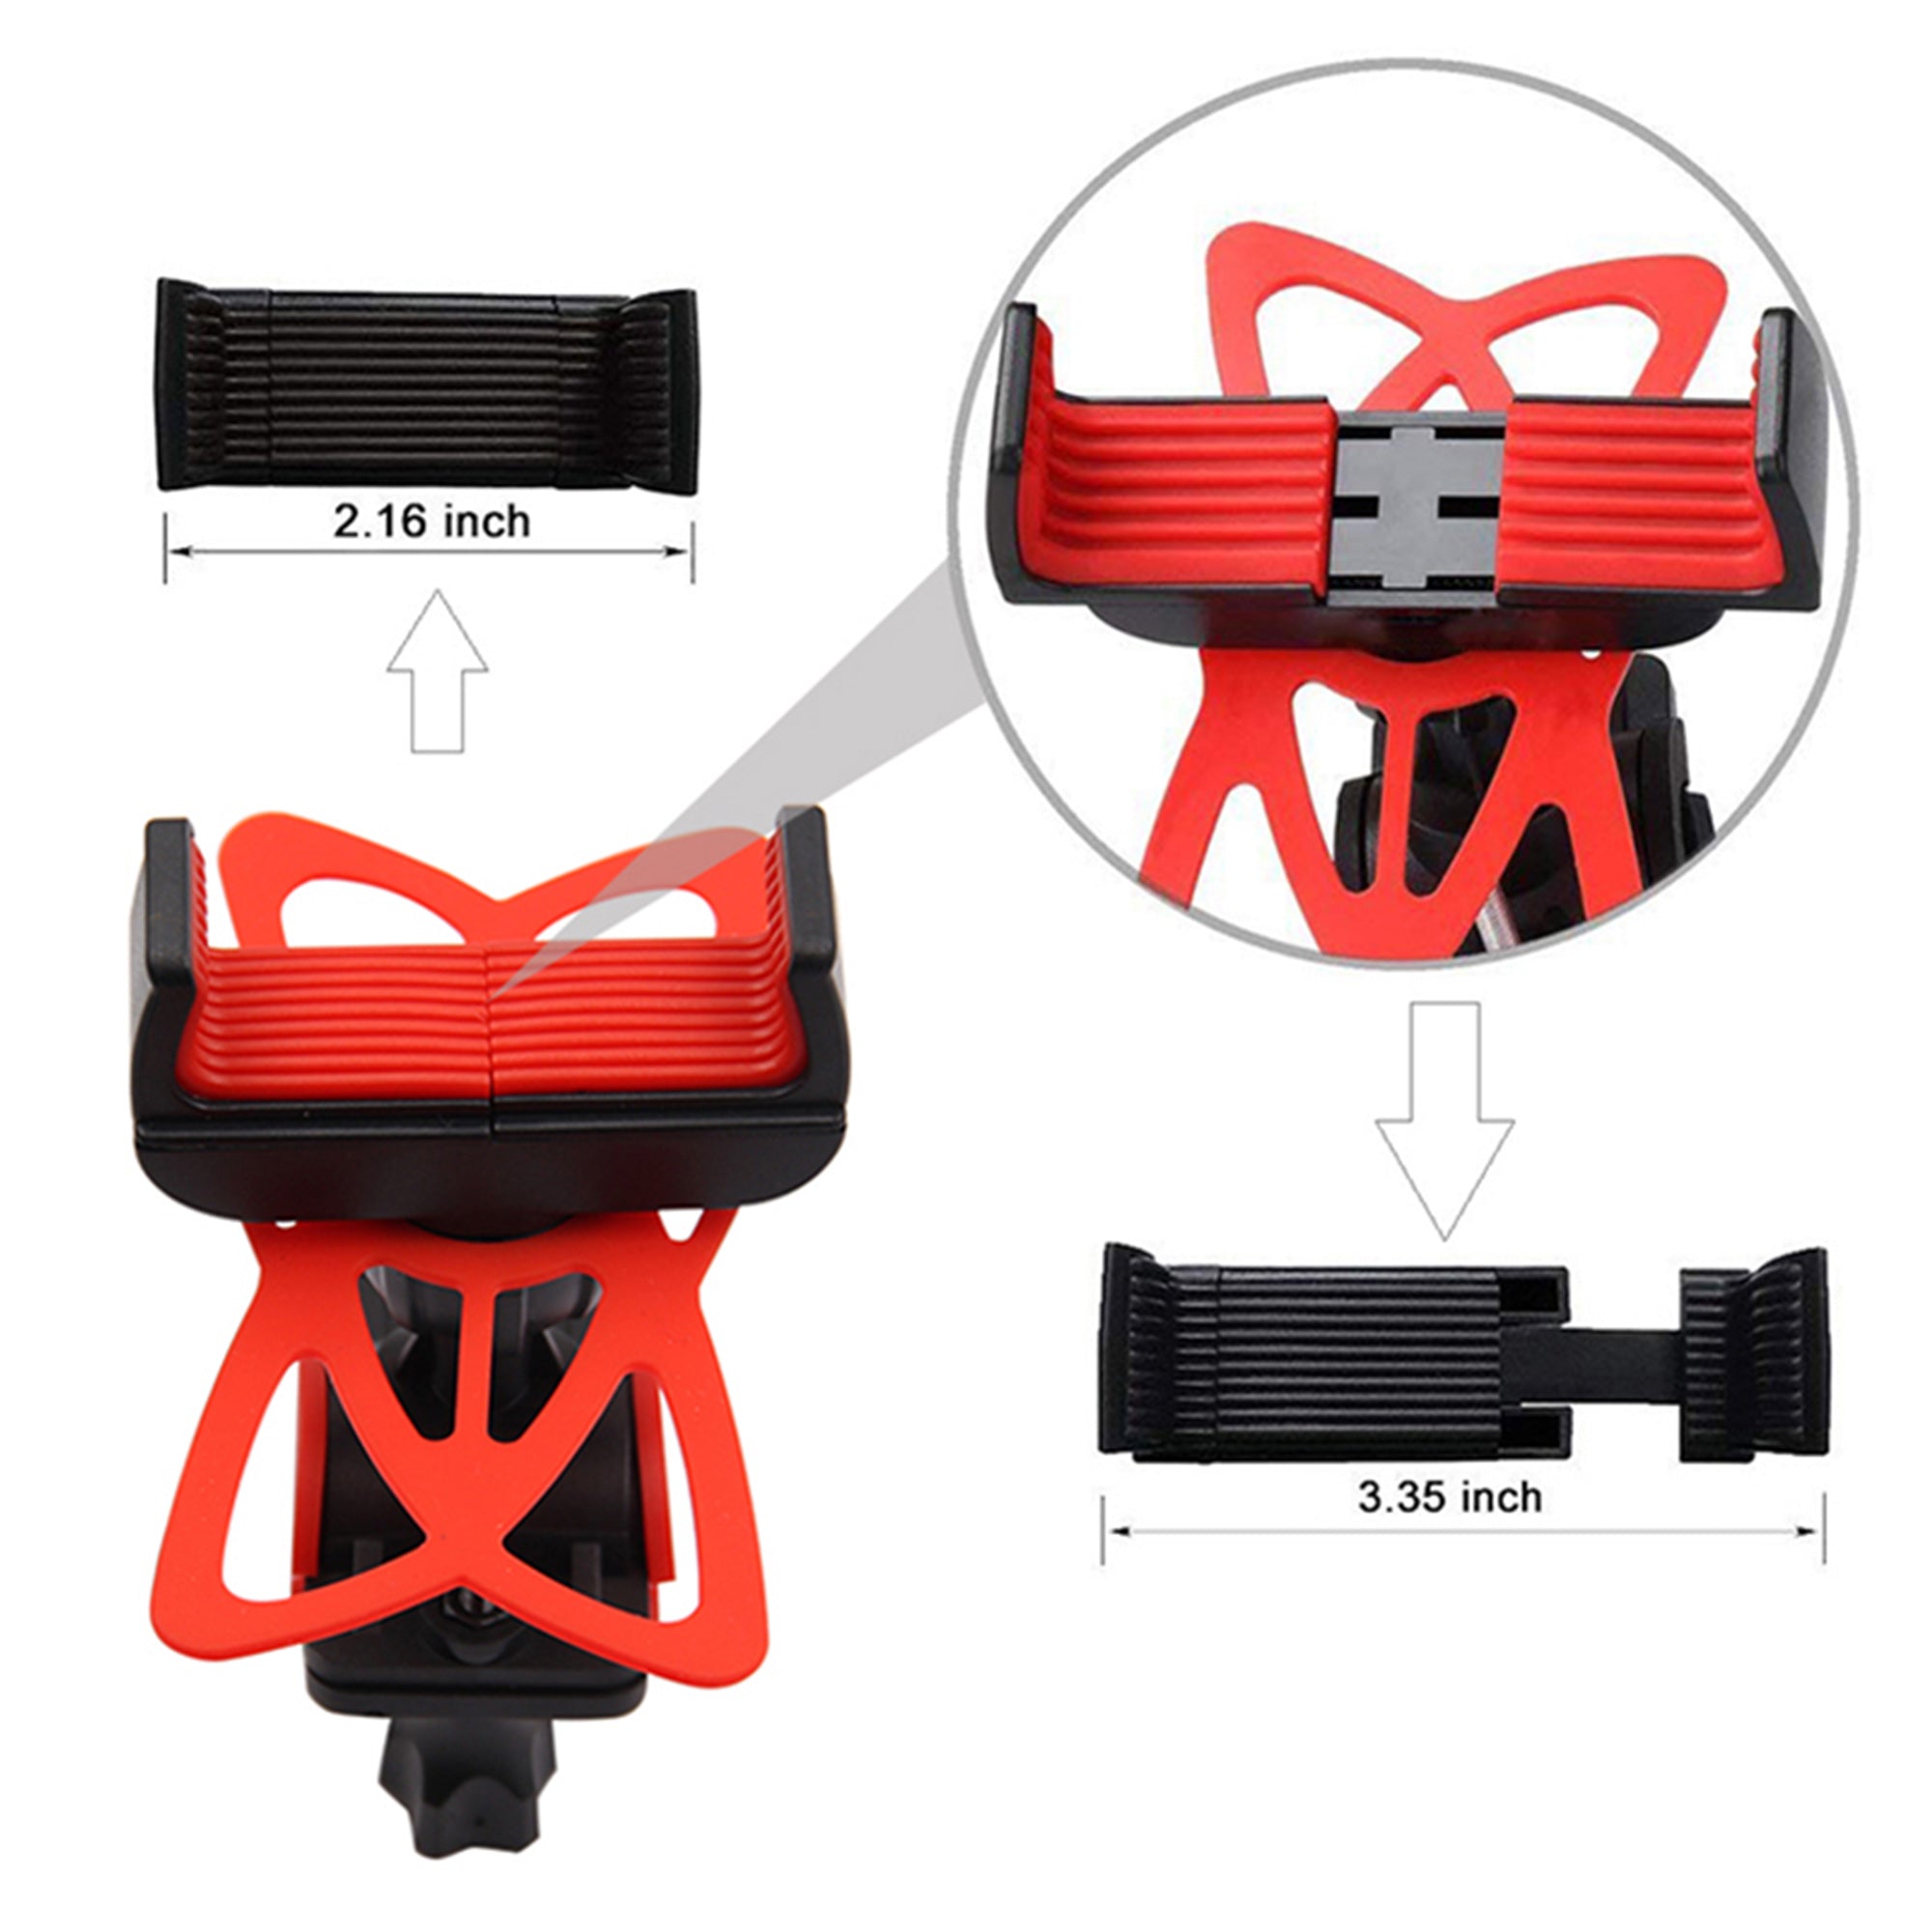 Phone Holder For Bike/Bicycle Lock Clip Universal Phone Support